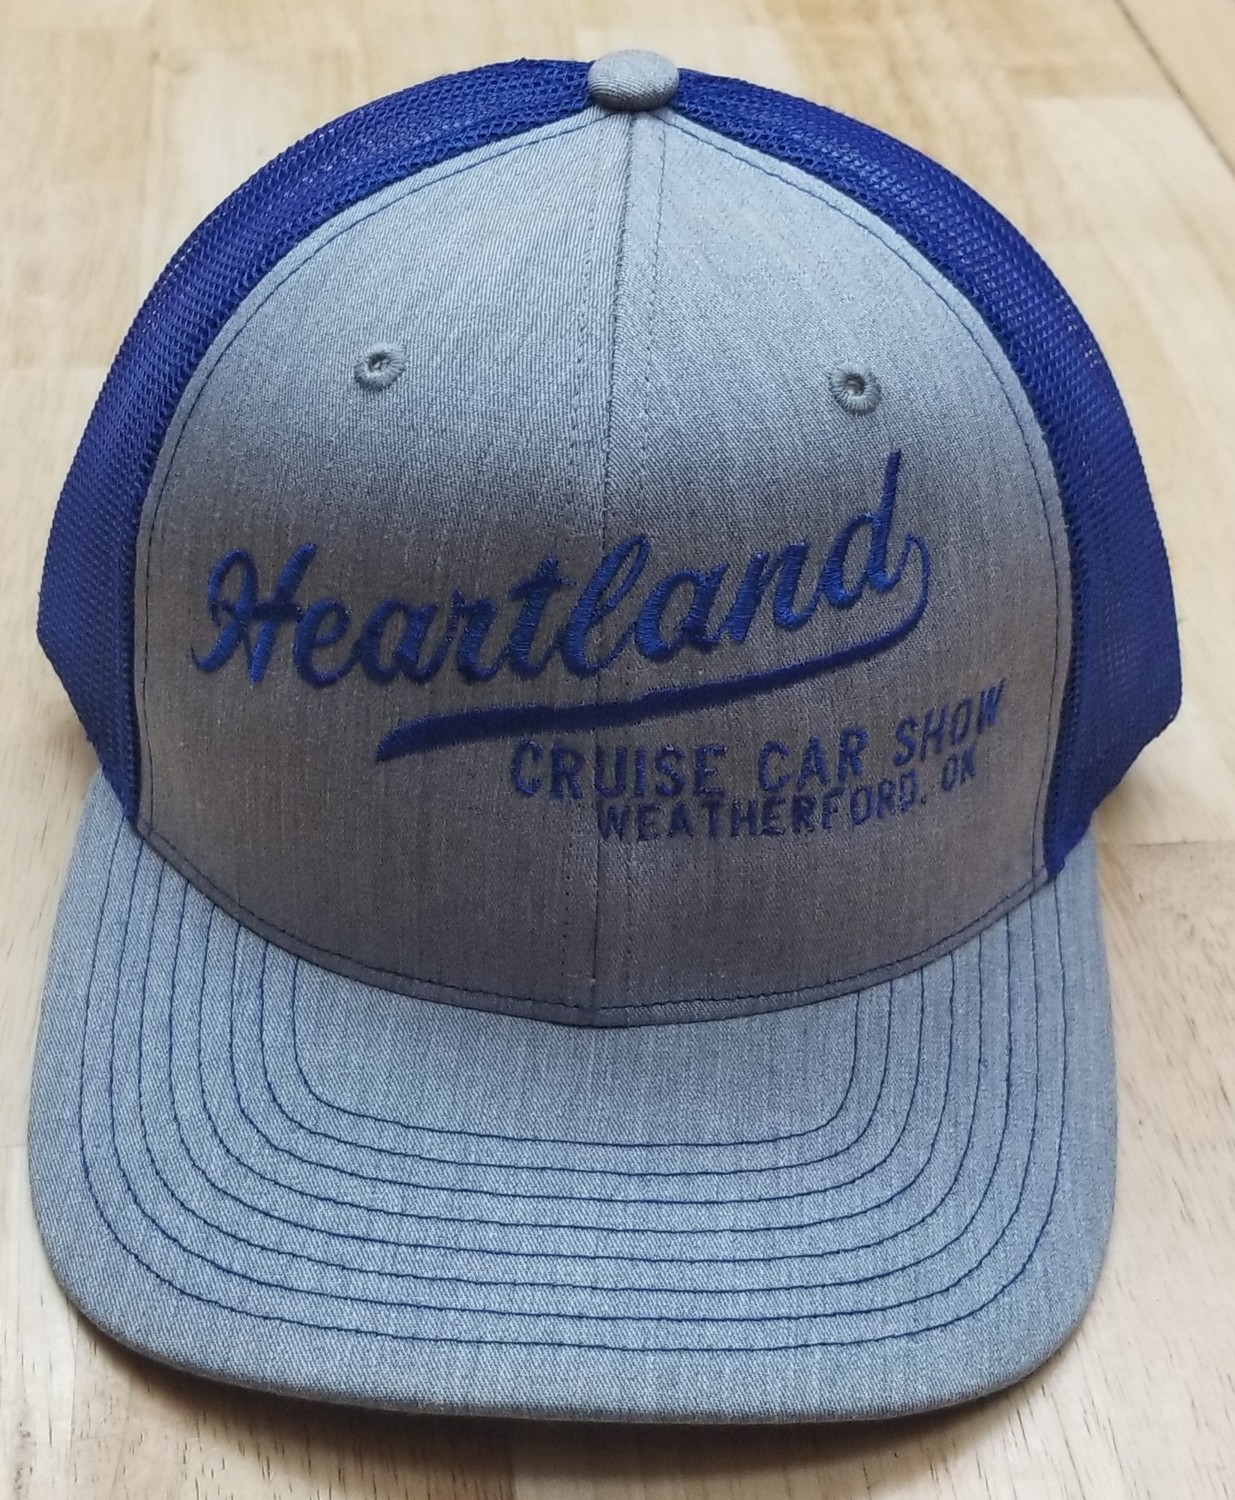 Hat with Large Print in Center